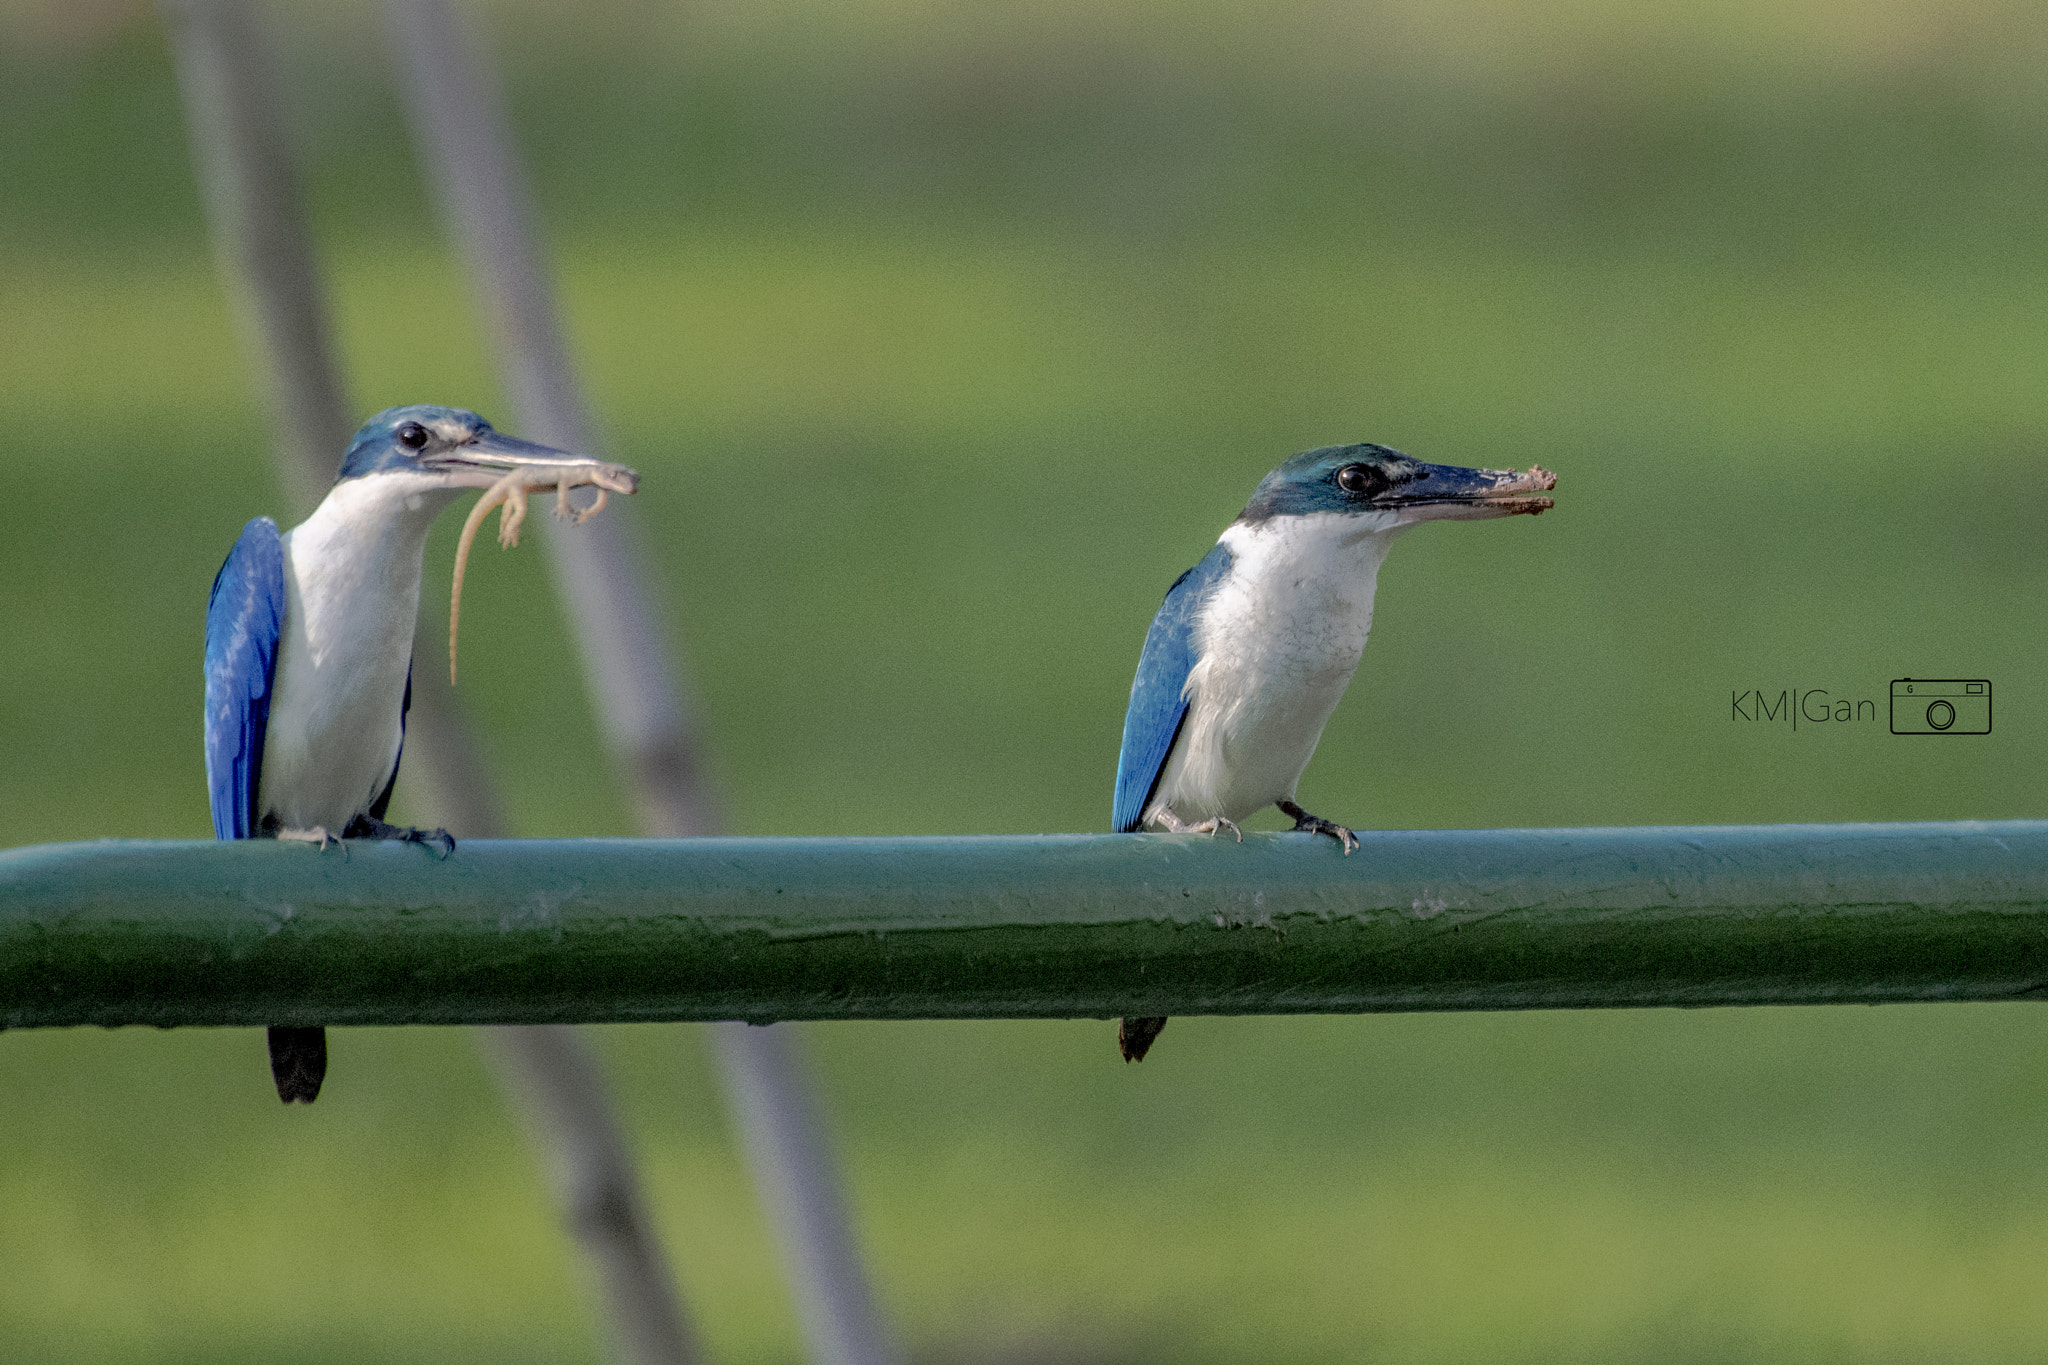 Nikon D5 sample photo. Collared kingfisher did not, however, consumed the ... photography